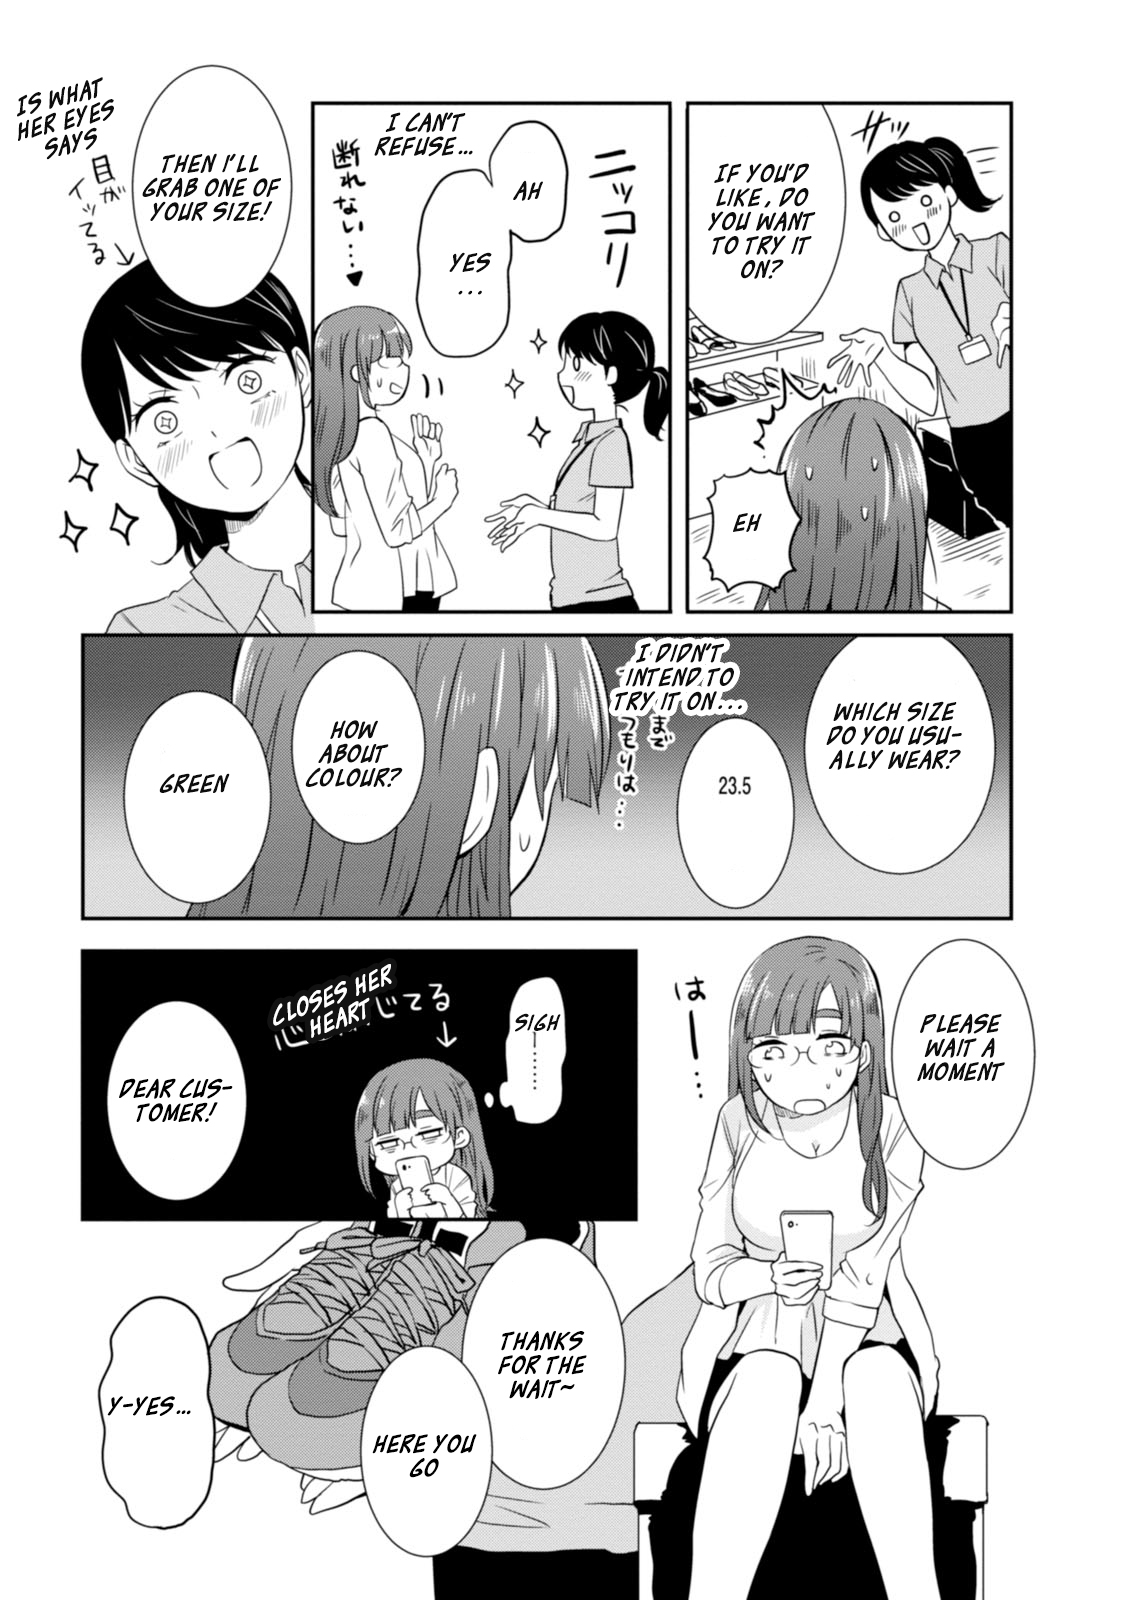 Hime No Dameshi Vol. 2 Ch. 16 Hime and diet